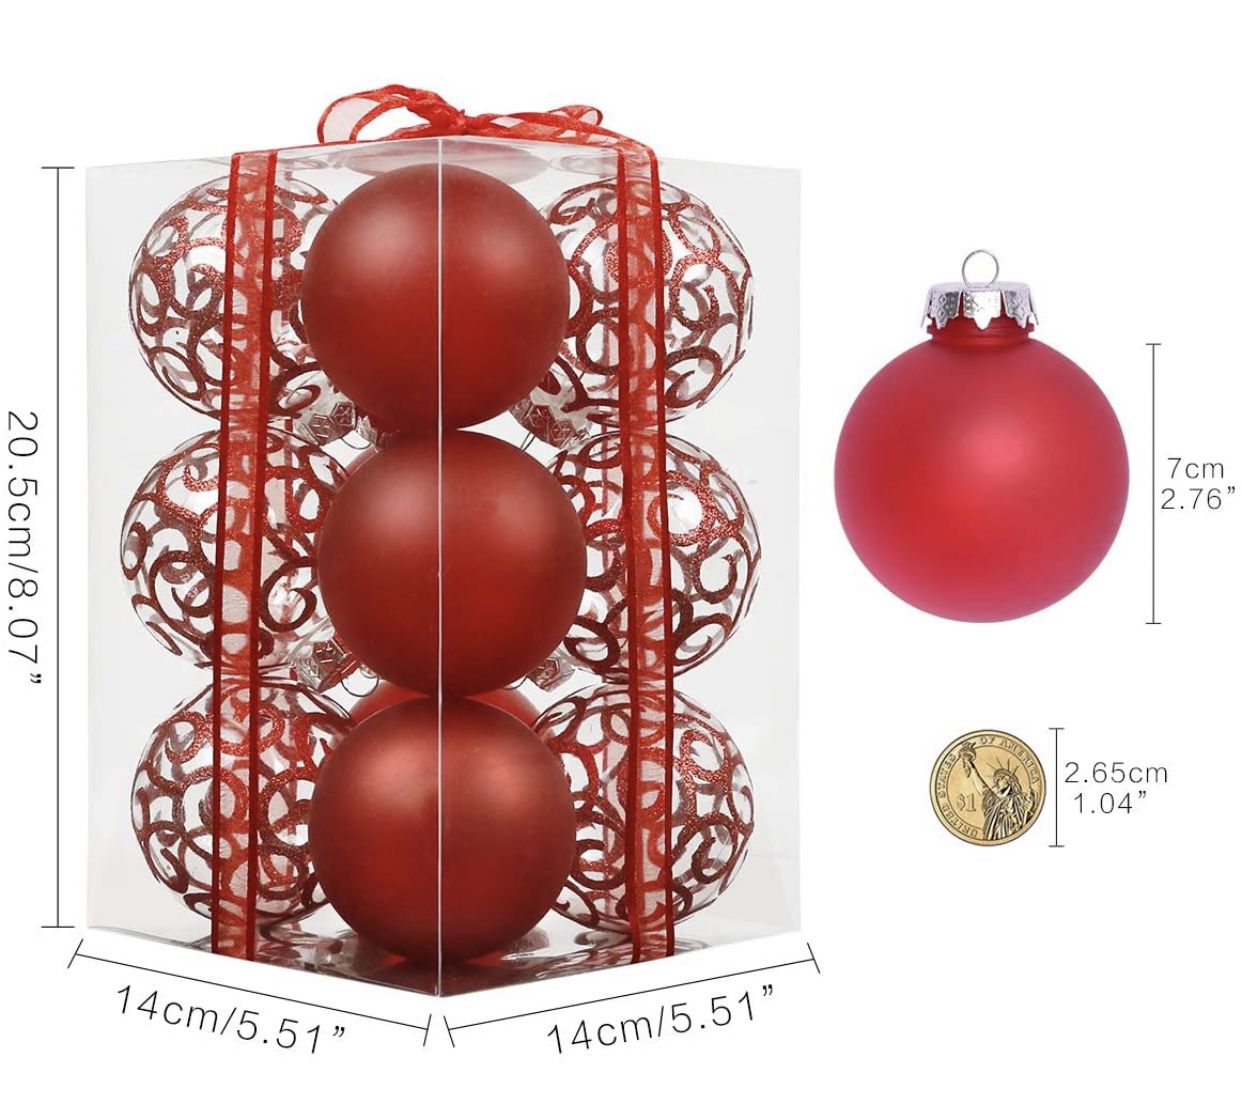 Brand New In Box Super Holiday 12ct Christmas Ball Ornaments, 2.76" Hand Painted Shatterproof Christmas Balls with Auspicious Cloud Pattern, Perfect H